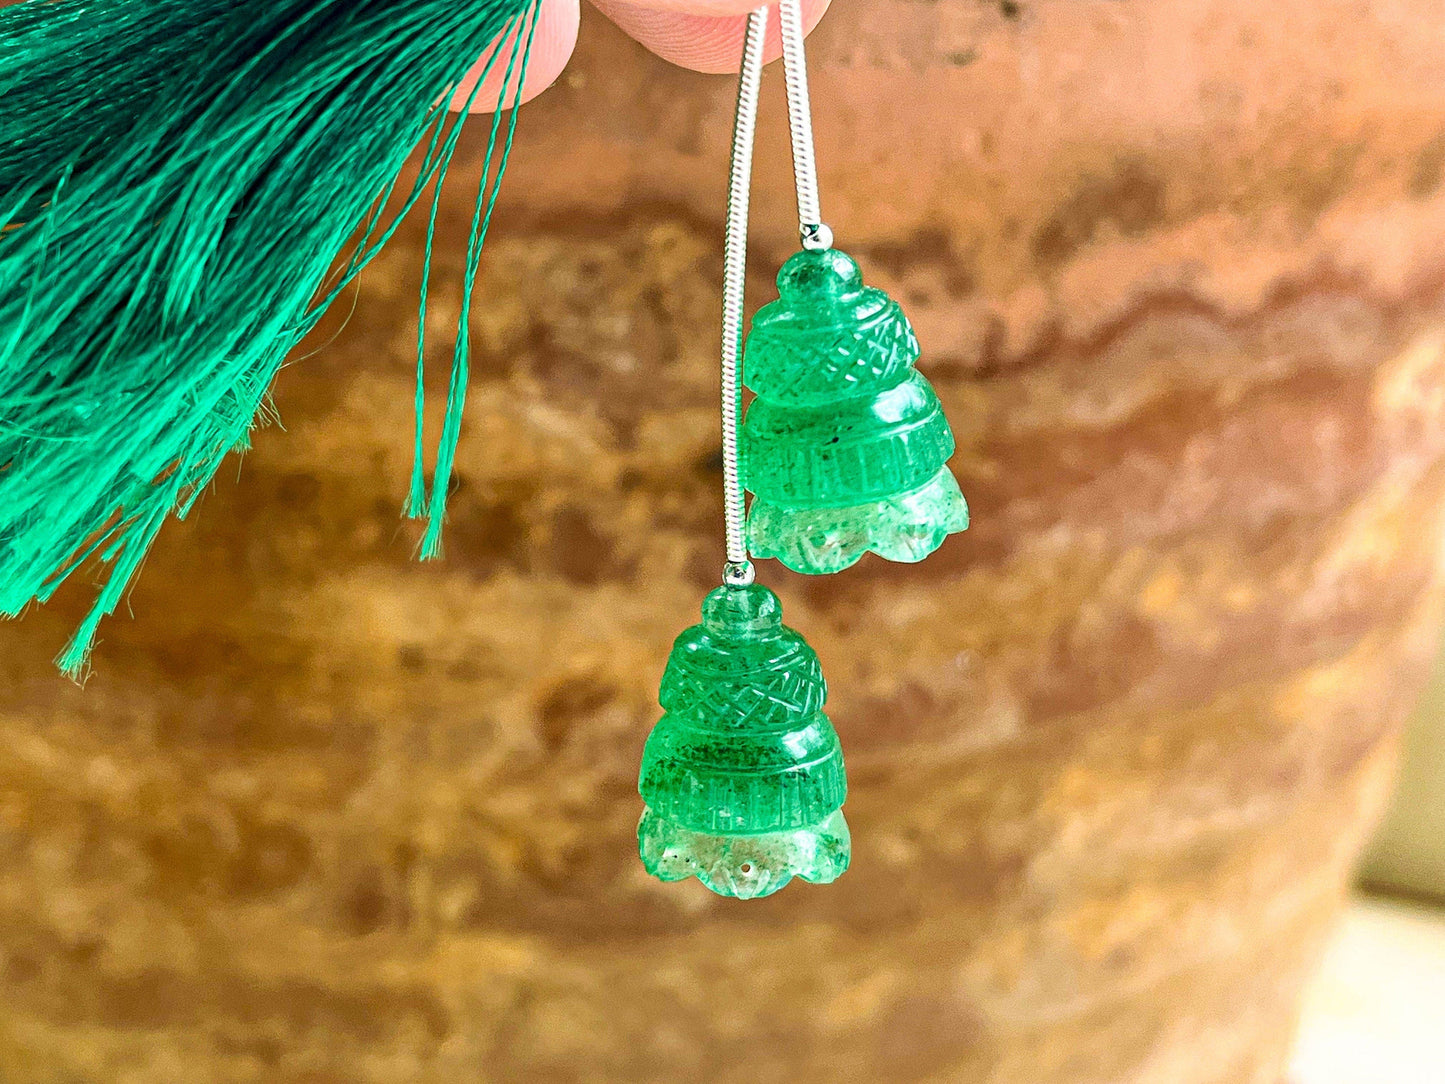 Green Aventurine Carving Bell Shape Pair, Beautiful! Carving Work in Natural Aventurine Gemstone for Earring's, 13x17MM, 2 Pieces Beadsforyourjewelry